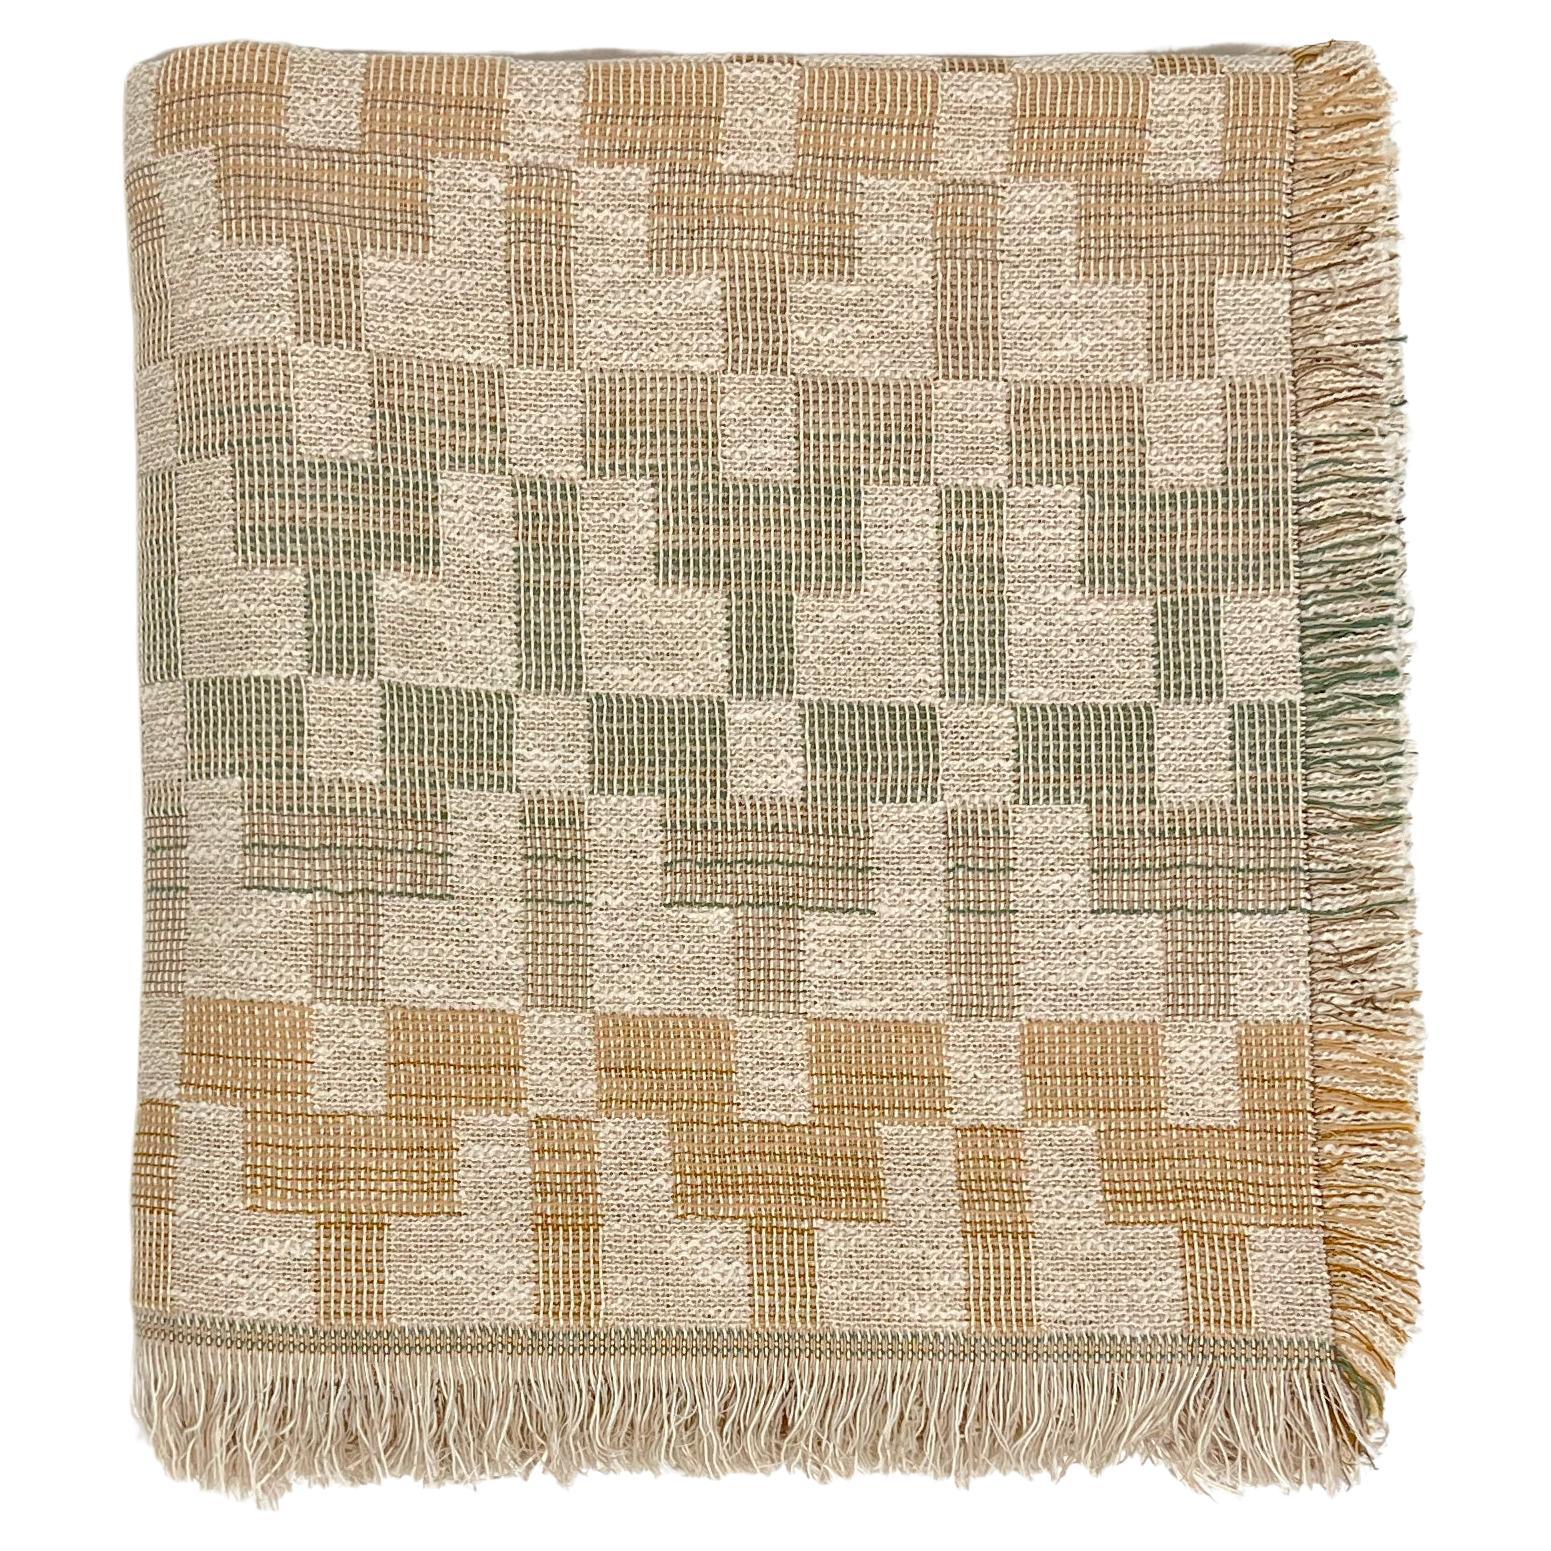 Patterned Woven Cotton Throw Blanket by Folk Textiles (Esme / Fade)